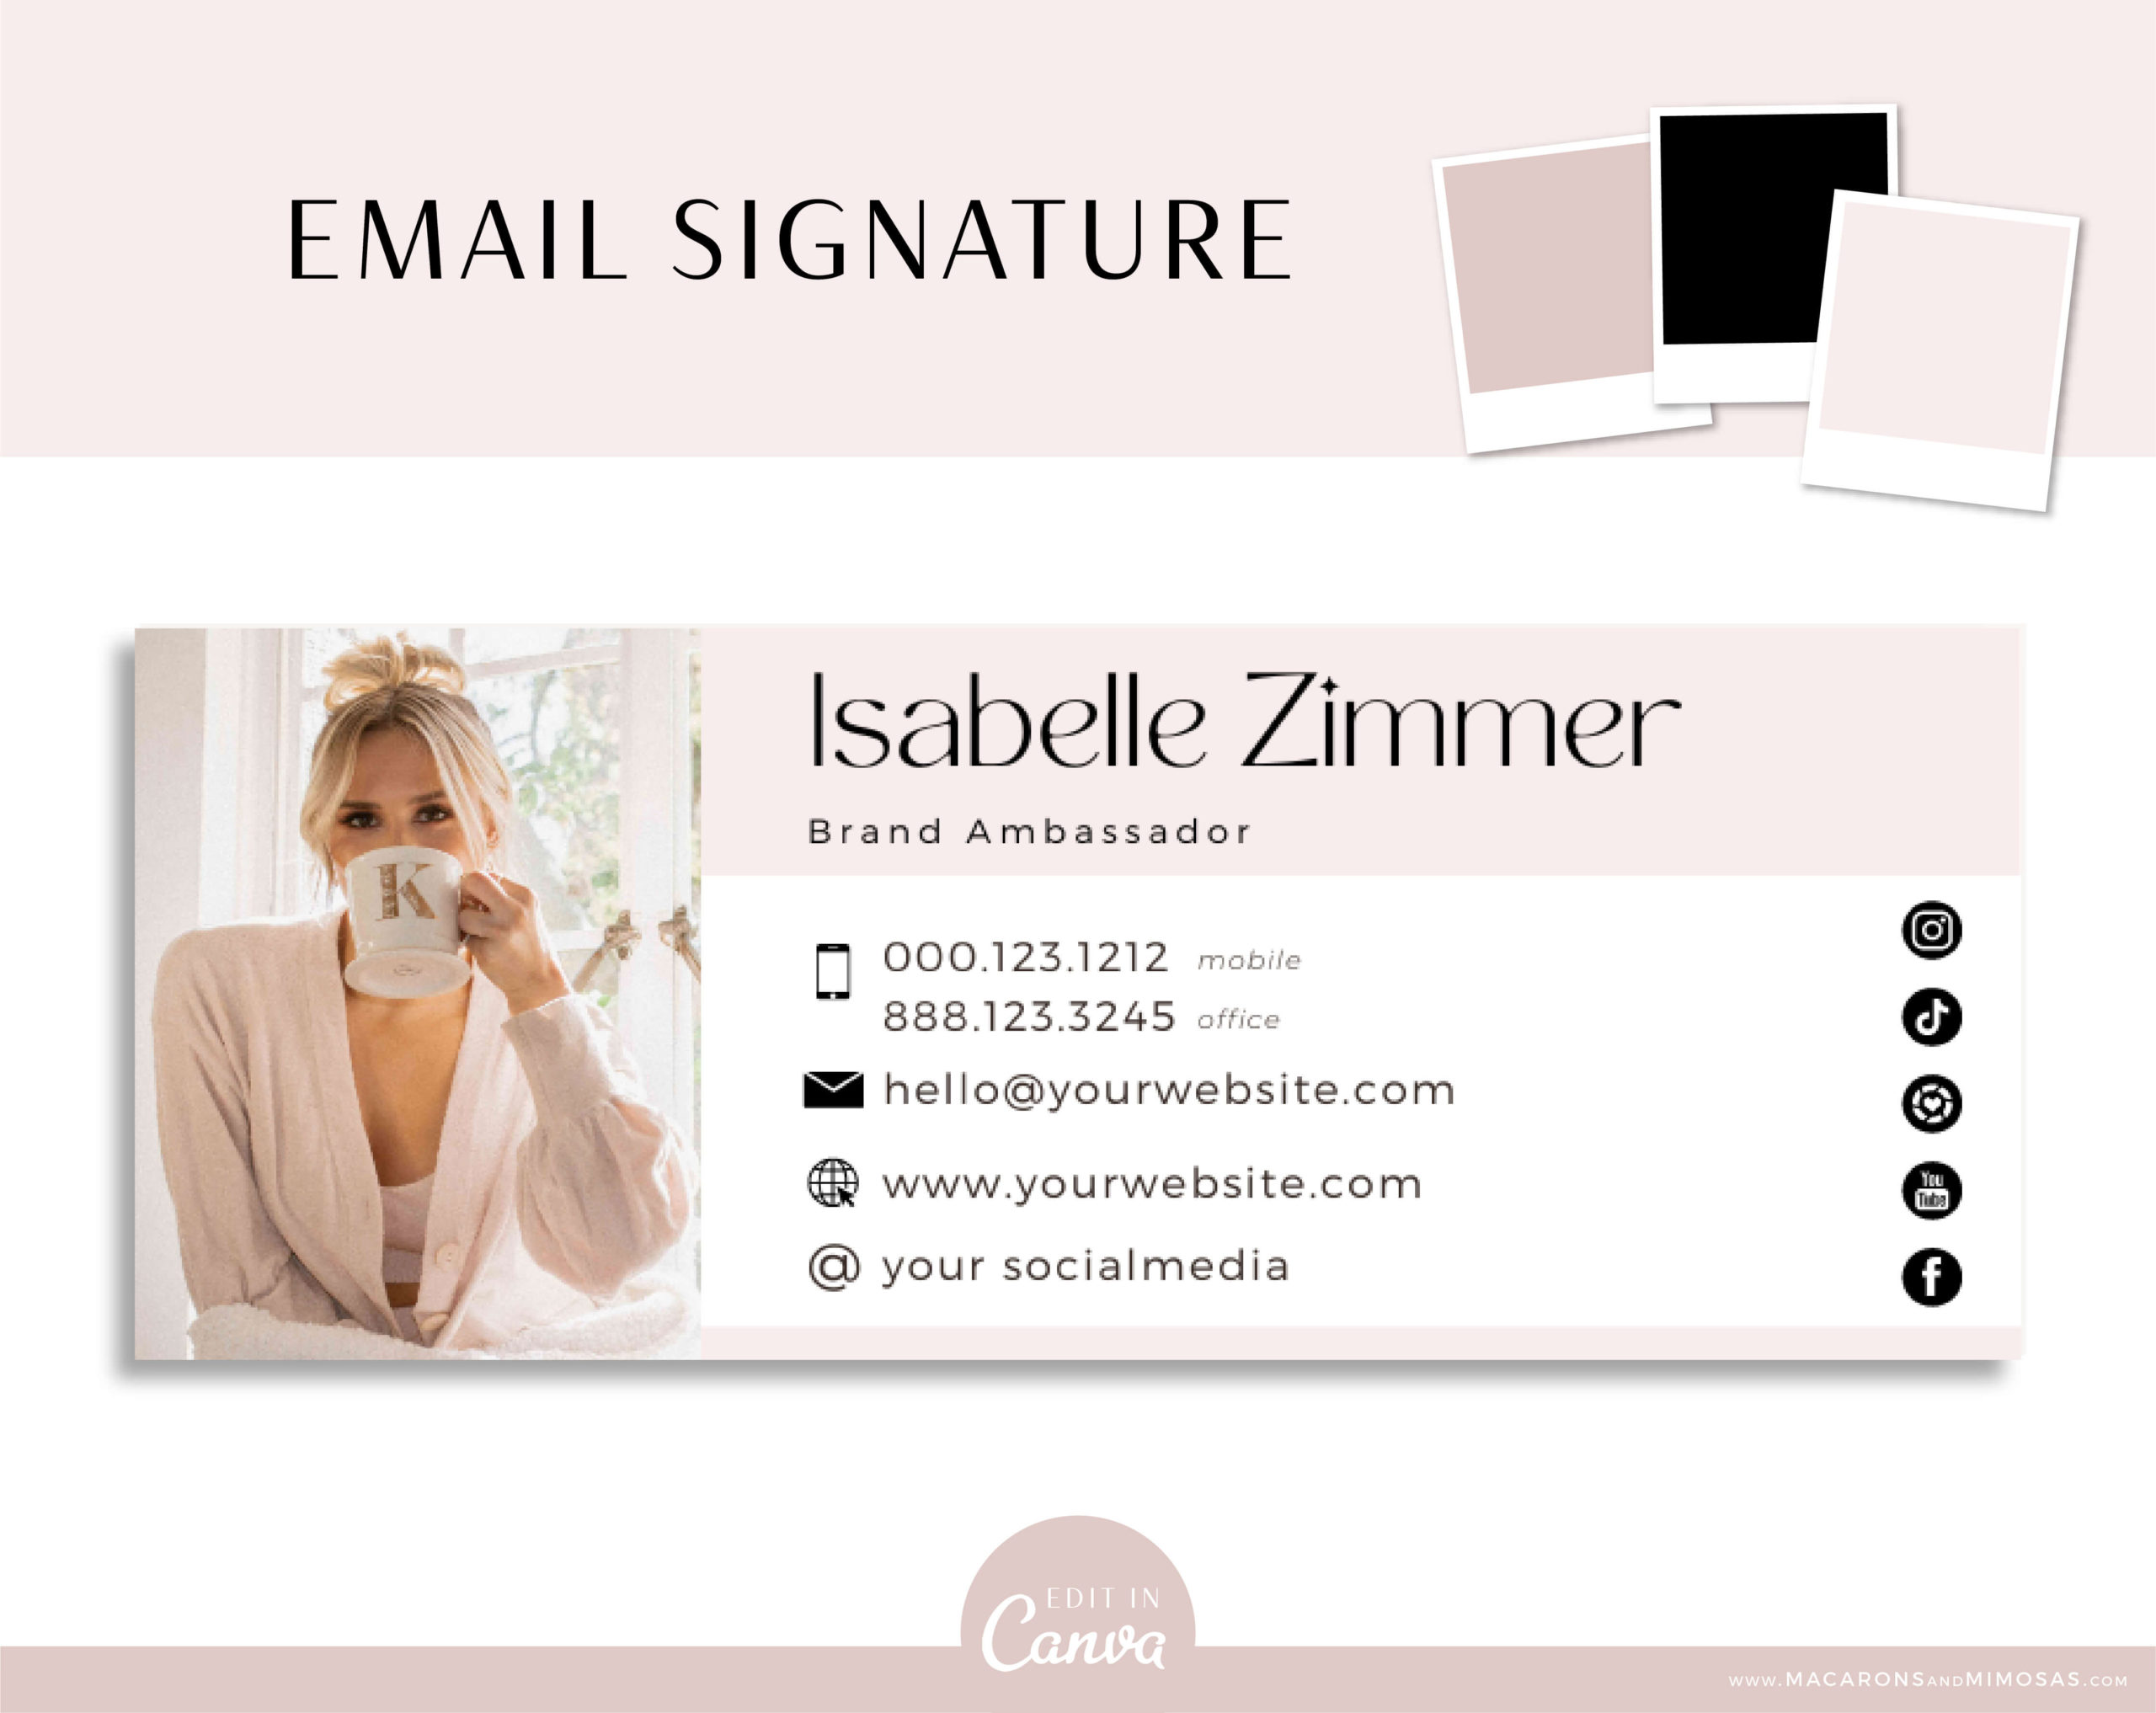 Pretty Pink Email Signature for Brand Ambassadors and Boutique